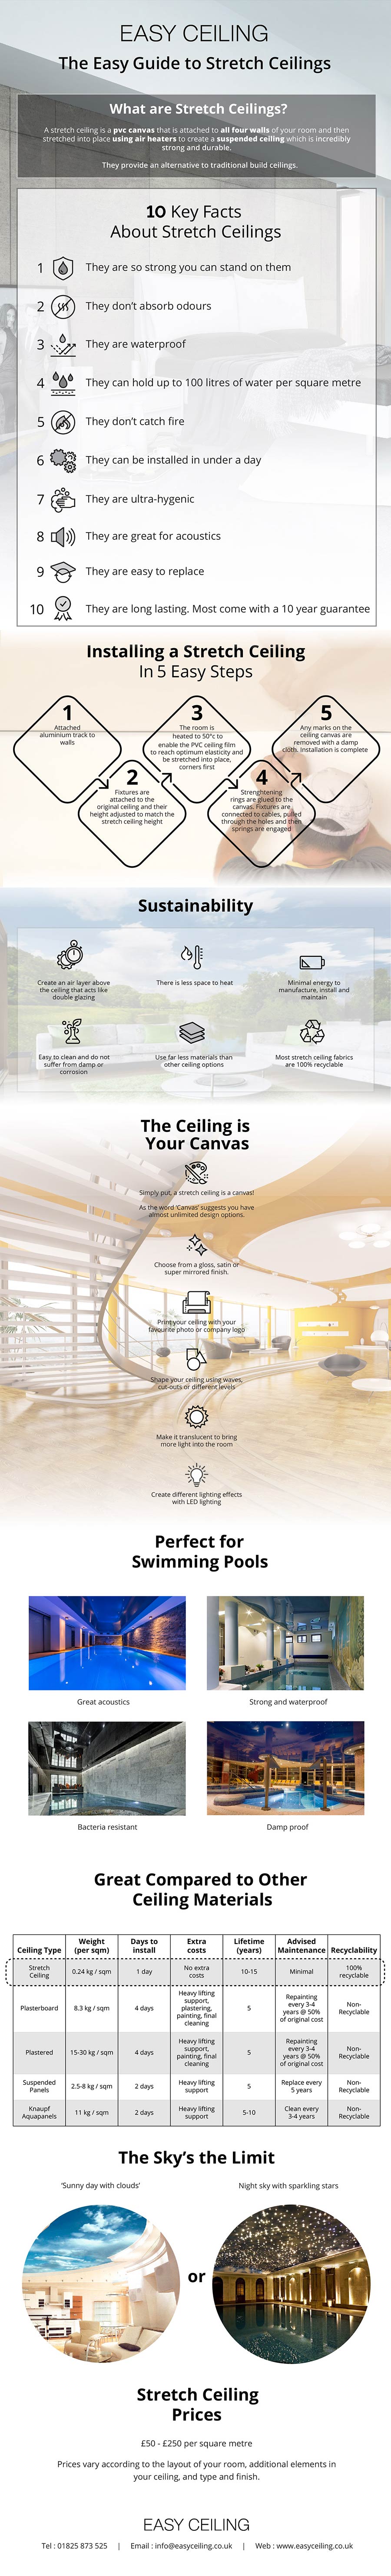 Easy Guide to Stretch Ceilings